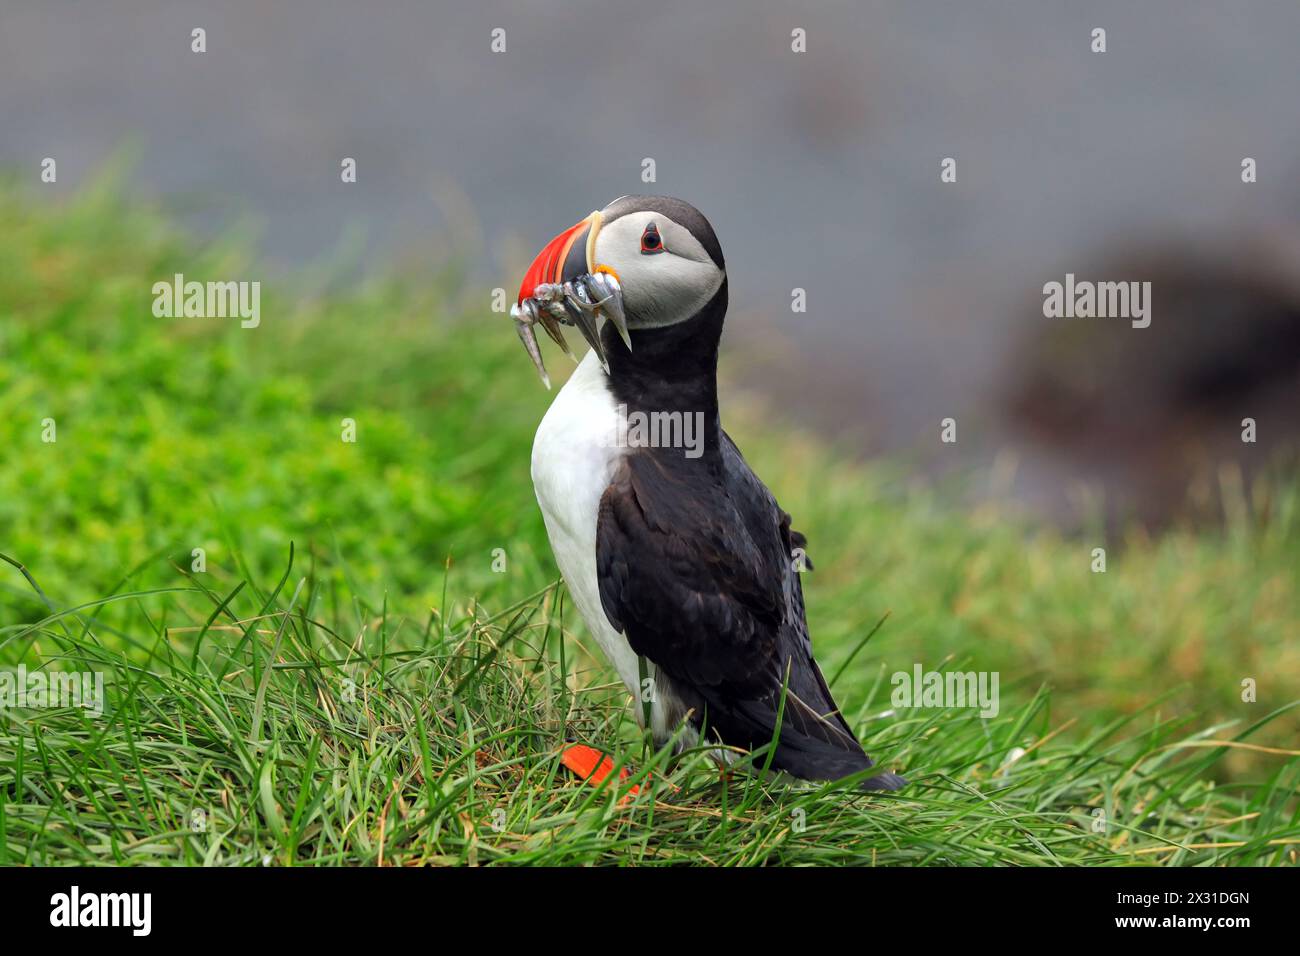 Geographie / Reise, Island, Austurland Eystra, Bakkagerdi, Atlantischer Puffin (Fratercula arctica), ADDITIONAL-RIGHTS-CLEARANCE-INFO-NOT-AVAILABLE Stockfoto